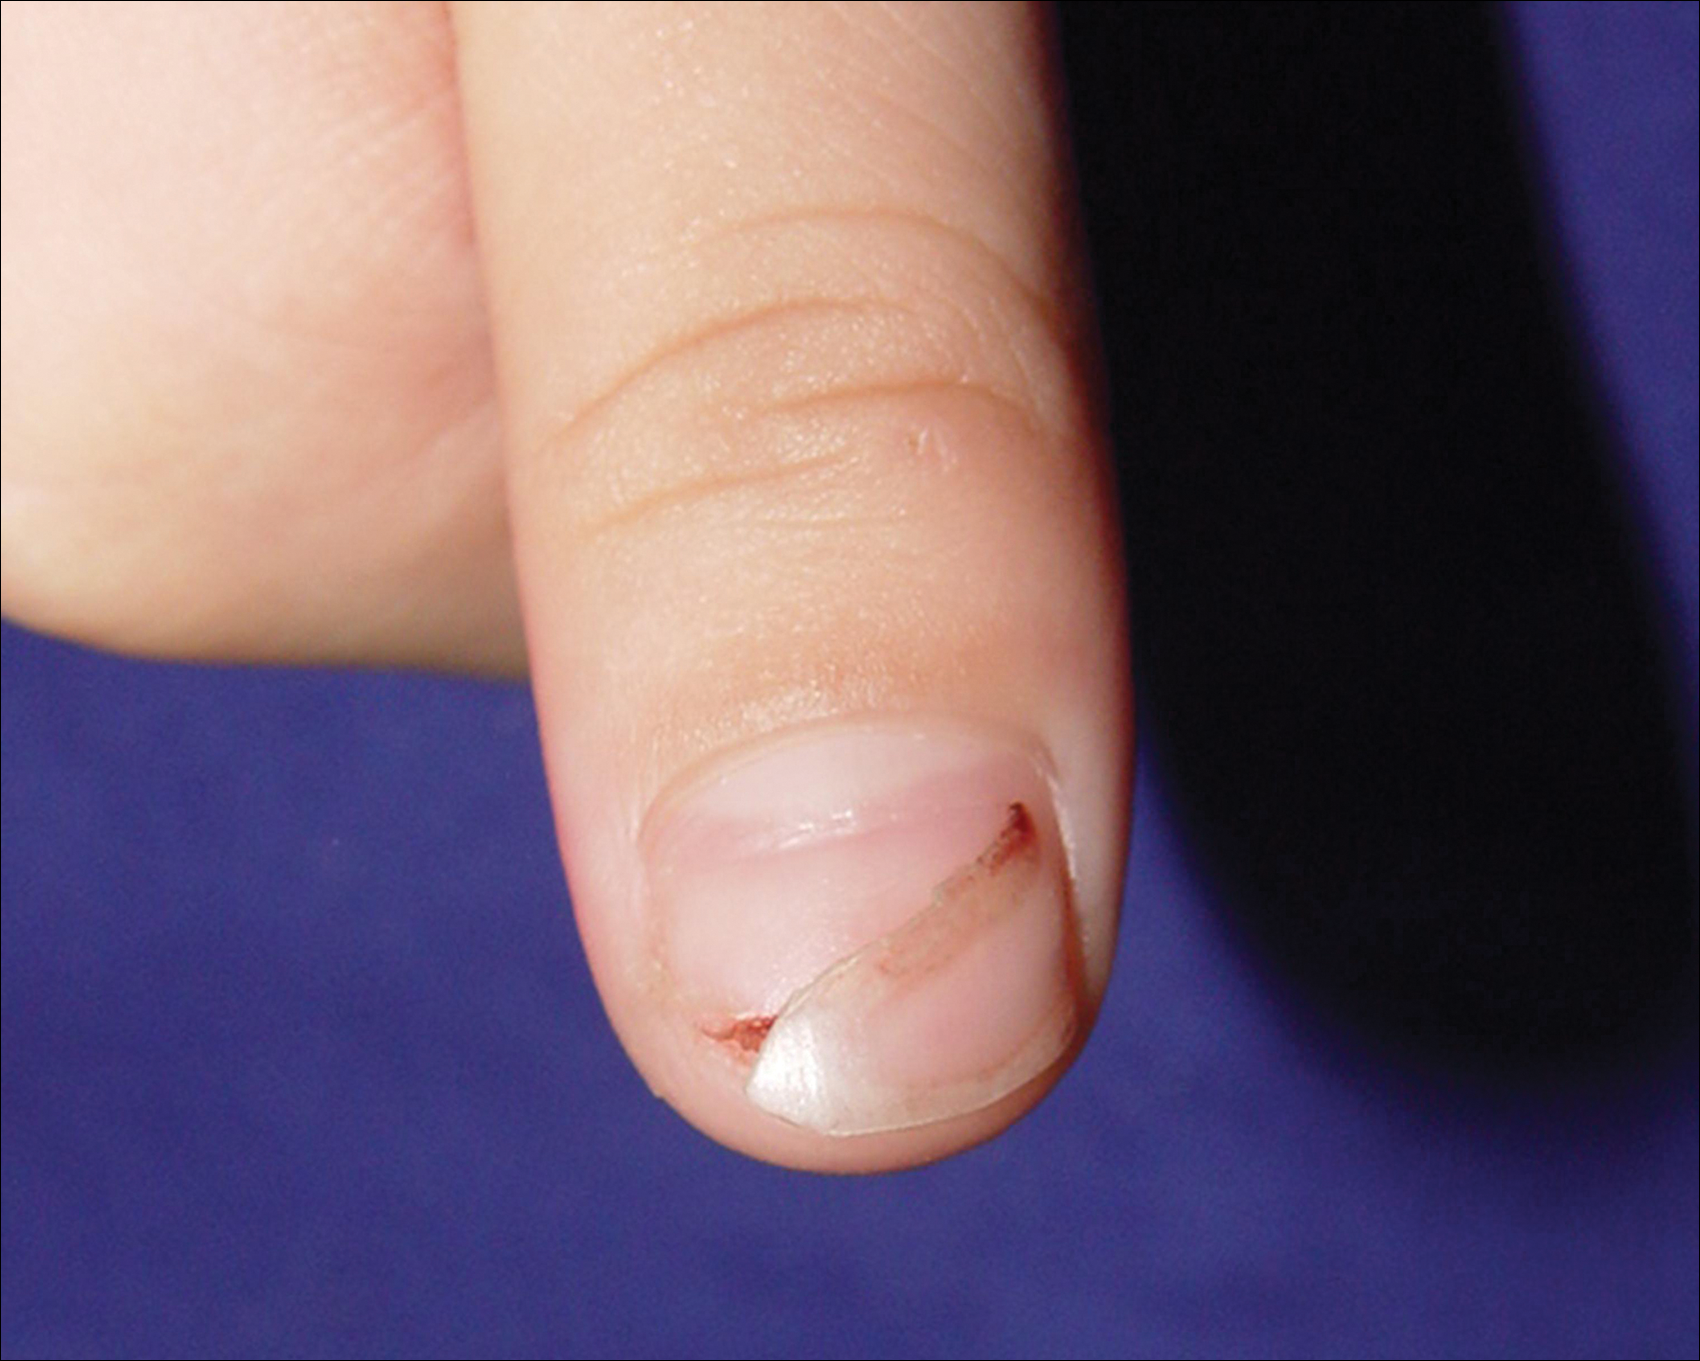 How can nails be signals of systemic disease? | HowStuffWorks